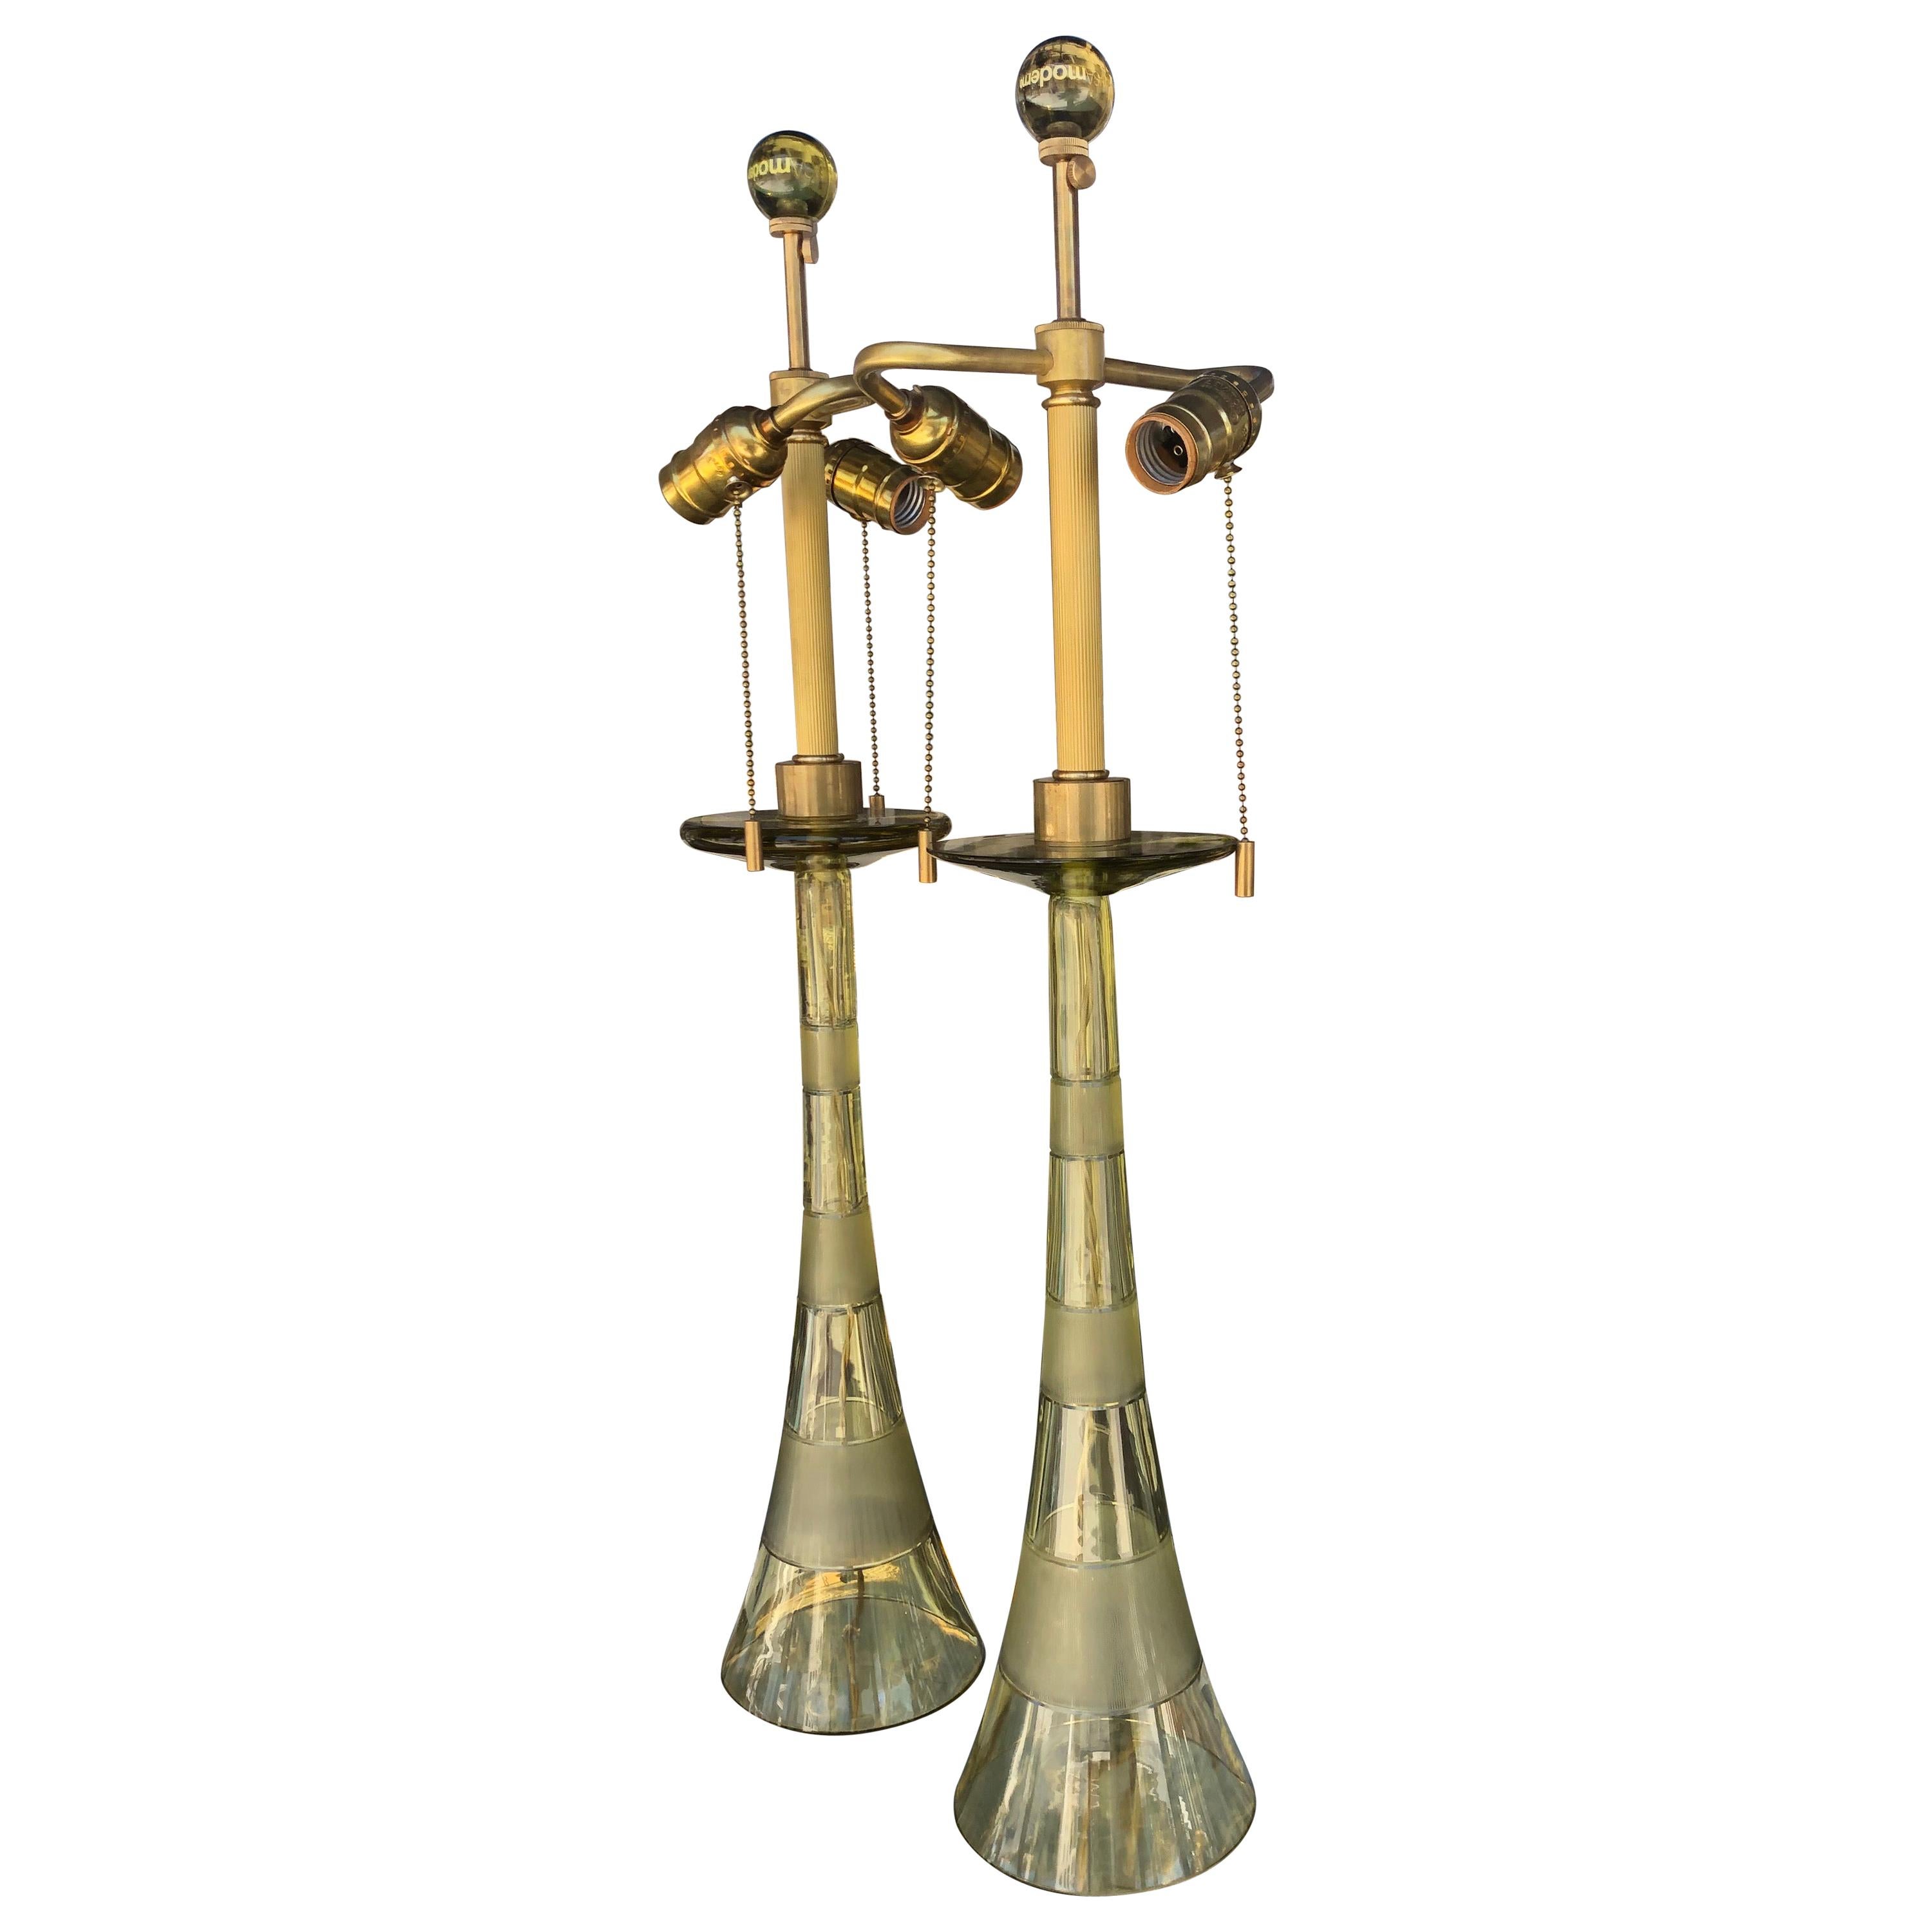 These beautiful pair of lamps were designed by John Hutton for Donghia in the 1980s. They are in a very rare citrine color glass and were made in Italy. No chips. Each lamp has brass fittings with double bulb sockets. Original silk cord wiring. One